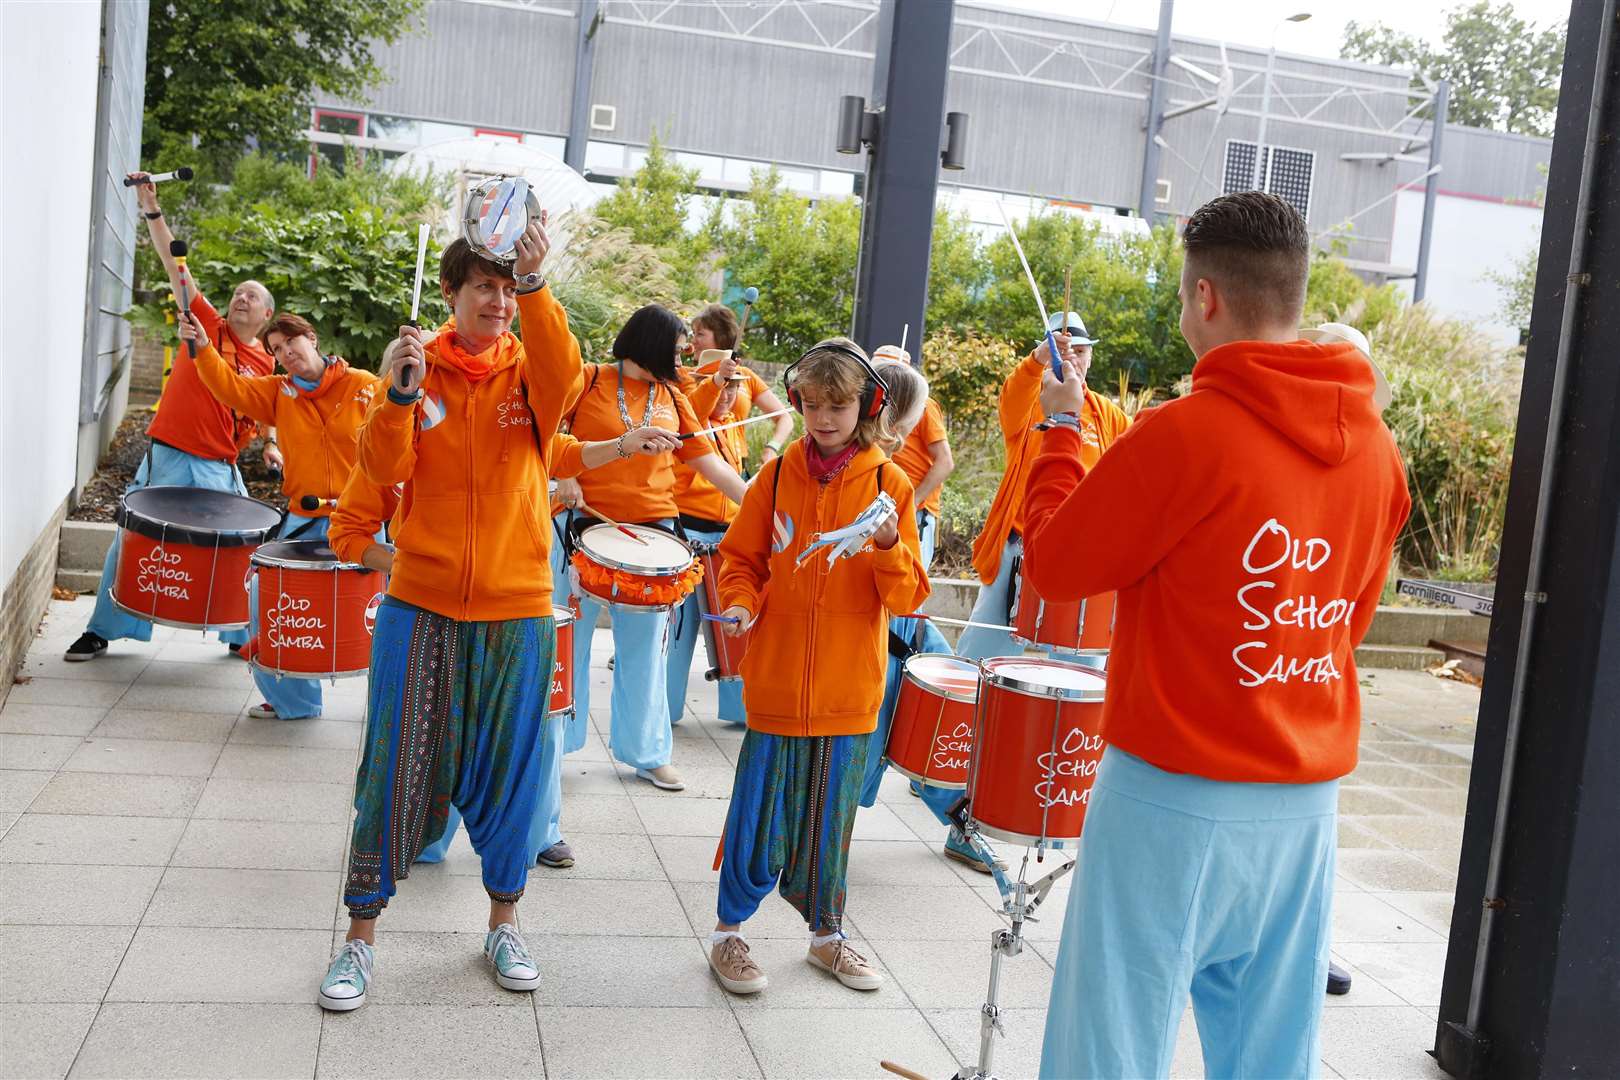 Family fun day for charity 20th anniversary. Old School Samba..Mid Kent College, Maidstone Campus, Oakwood Park, Tonbridge Road, Maidstone, ME16 8AQ.Picture: Andy Jones. (4337484)